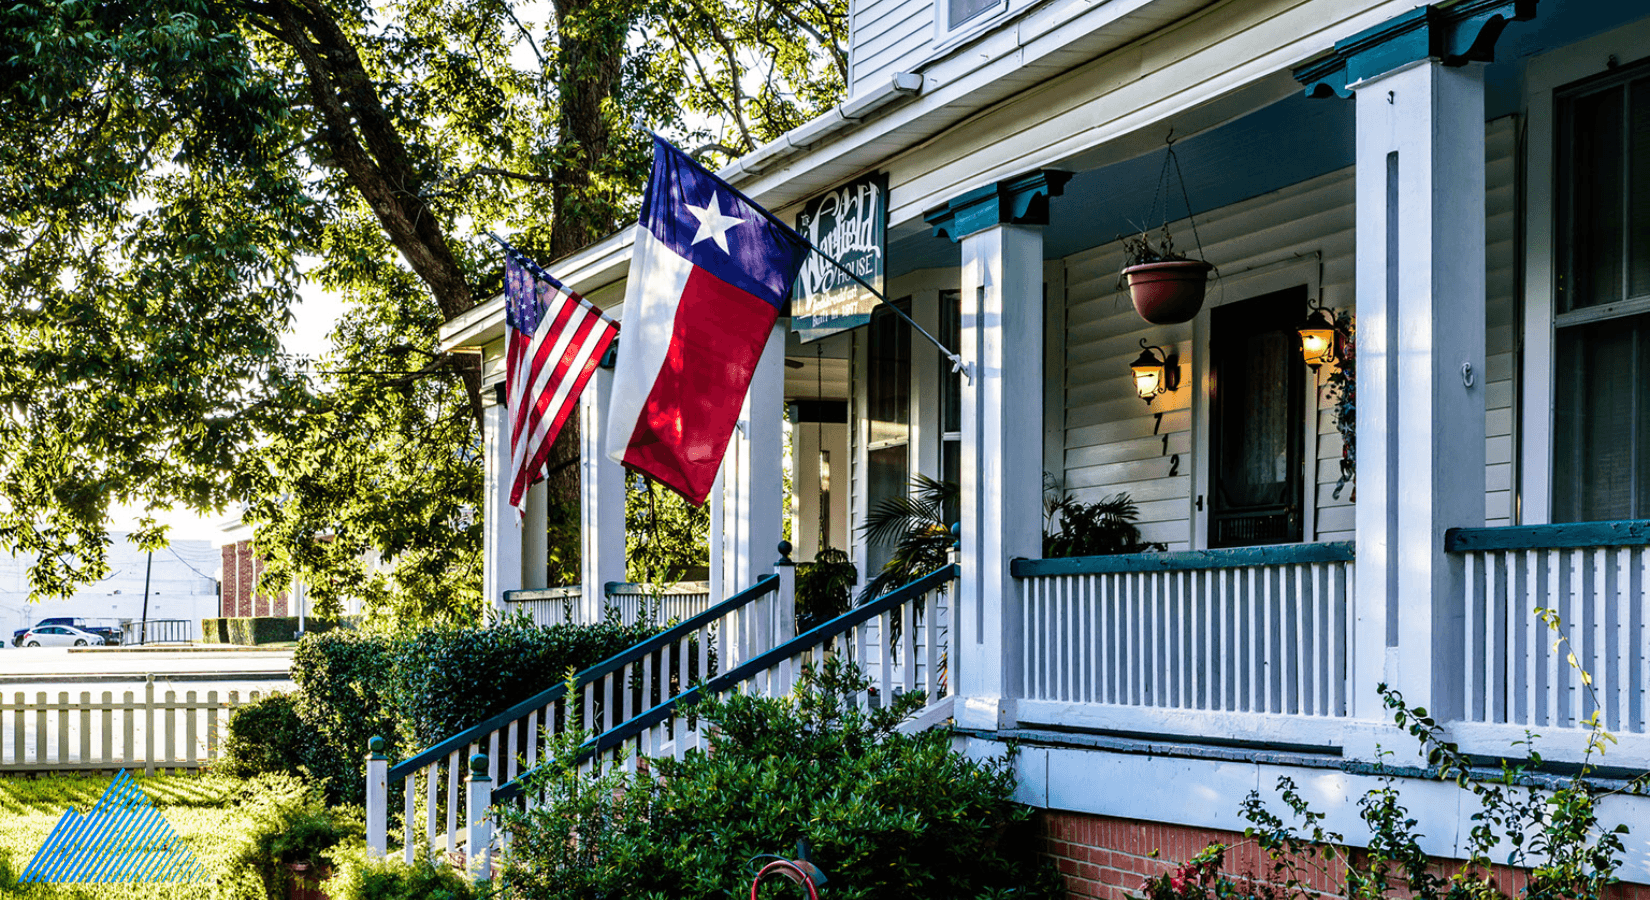 Home with Texas and American flags hanging outside